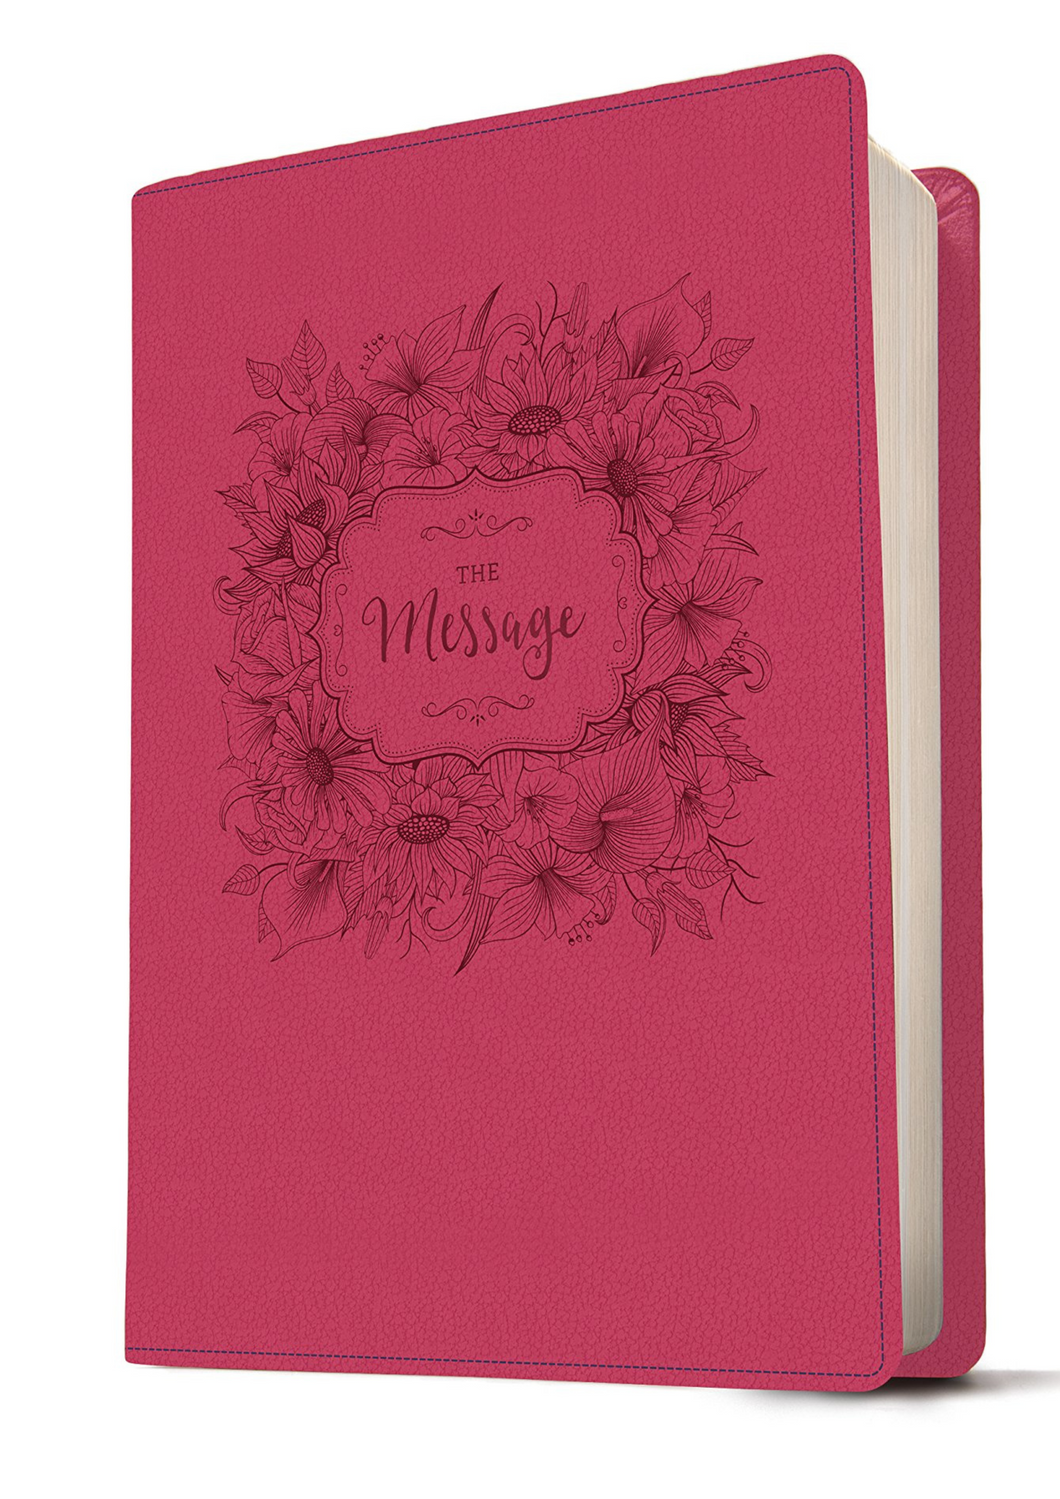 The Message: Dusty Rose Floral Leather-Look, The Bible in Contemporary Language Imitation Leather